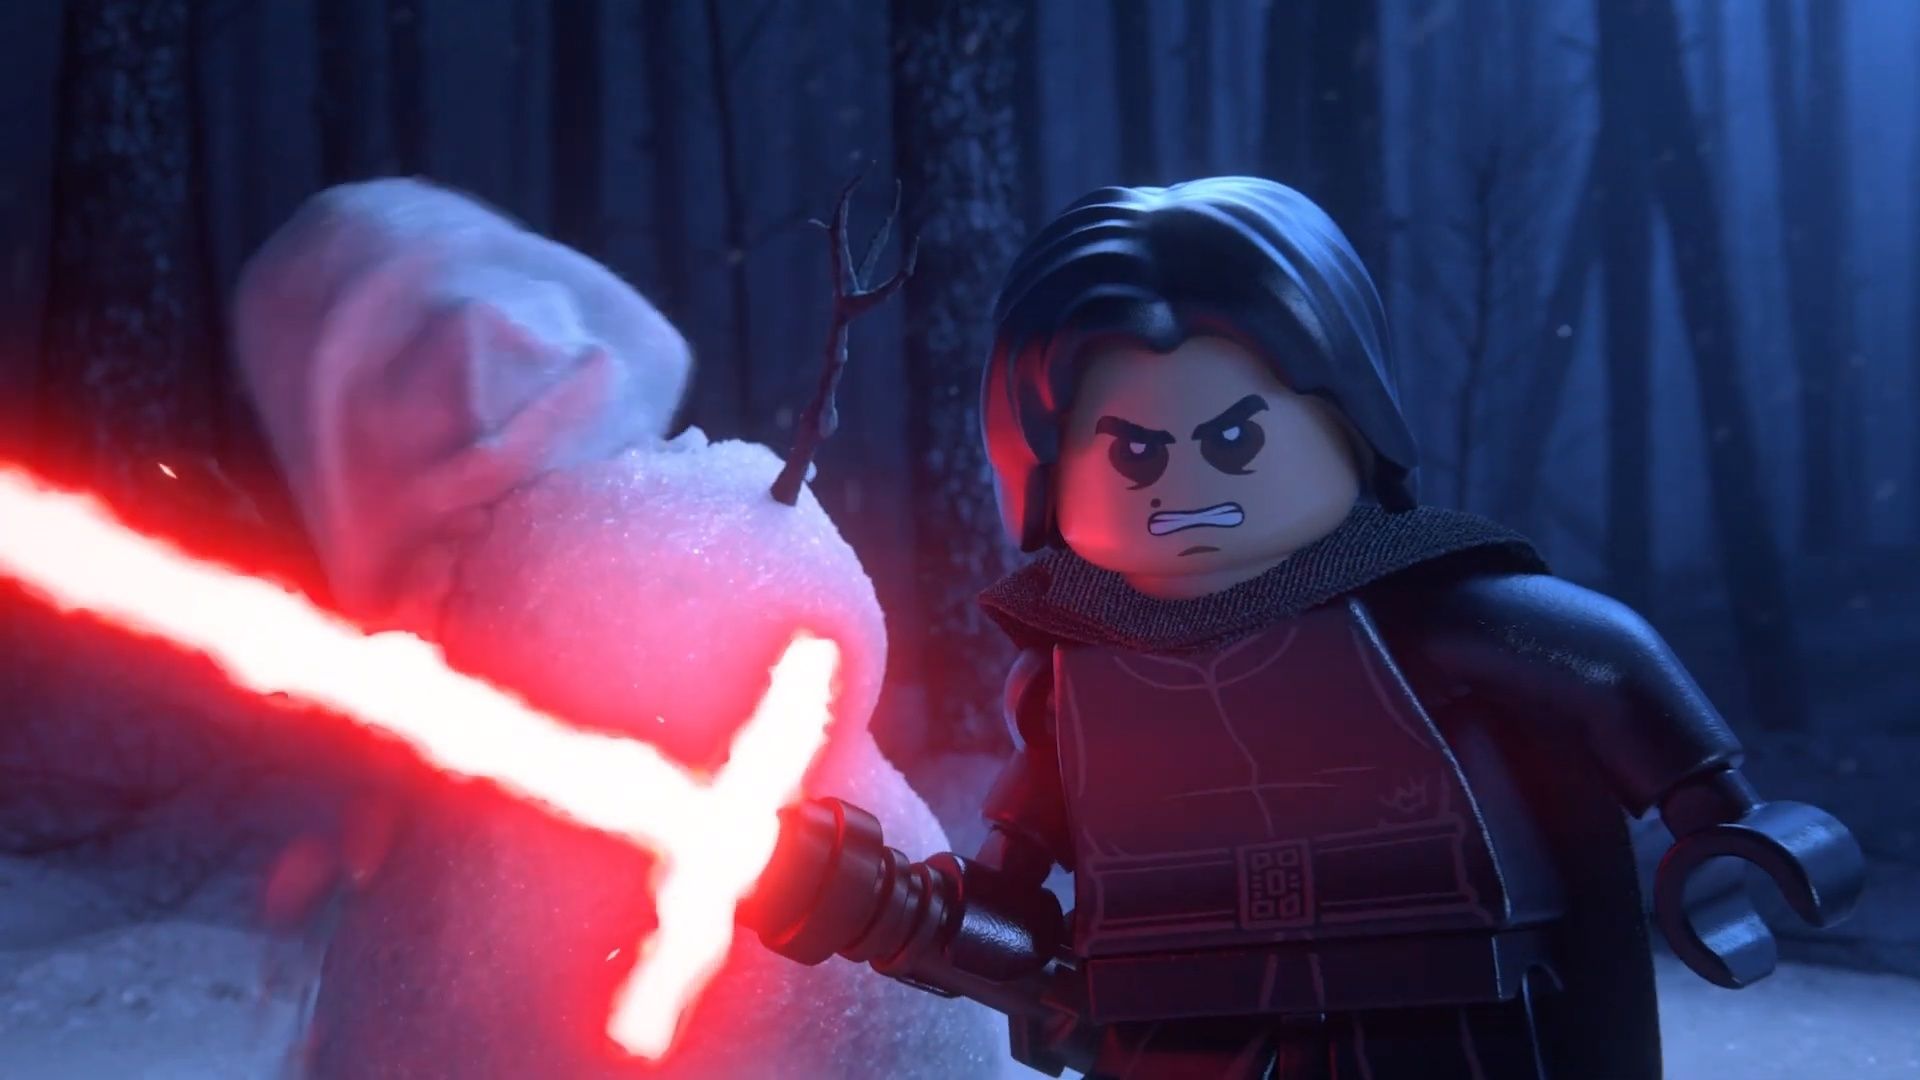 Lego Star Wars: The Skywalker Saga Will Feature Almost 500 Characters, With “Many” Playable